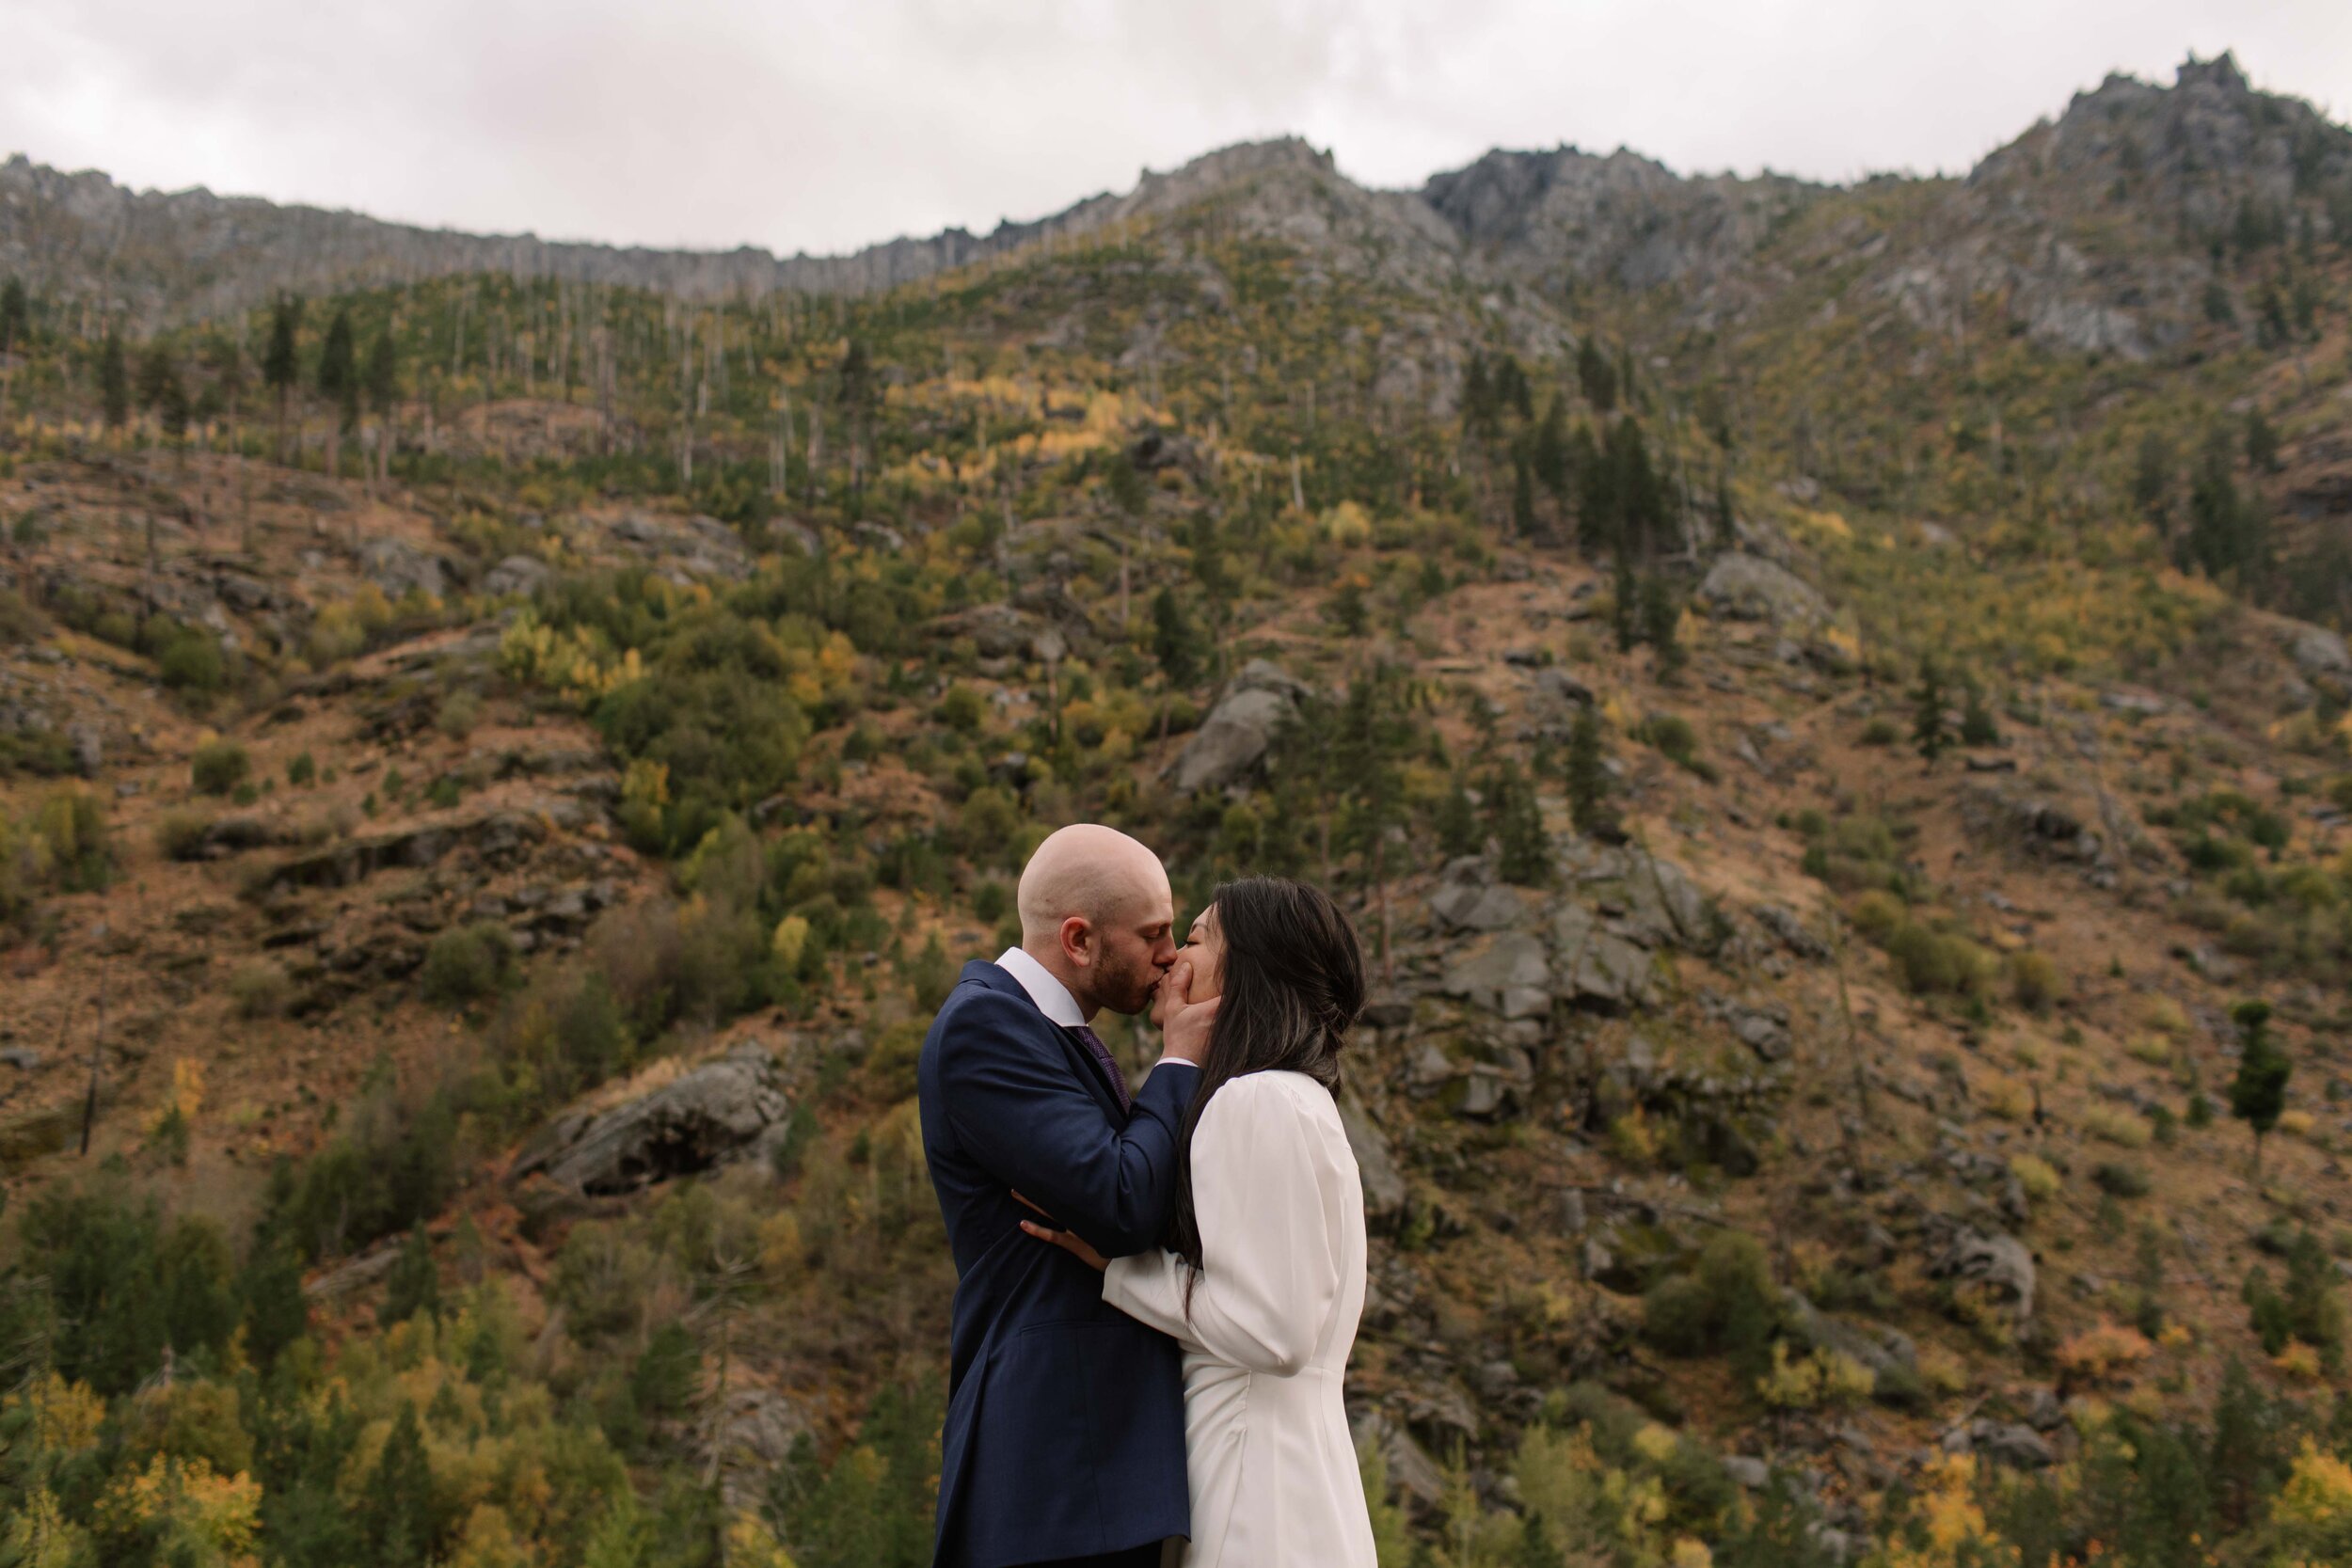 socal-san-diego-southern-california-elopement-small-wedding-outdoor-forest-mountains-waterfall-ceremony-leavenworth-washington-photographer-56.jpg